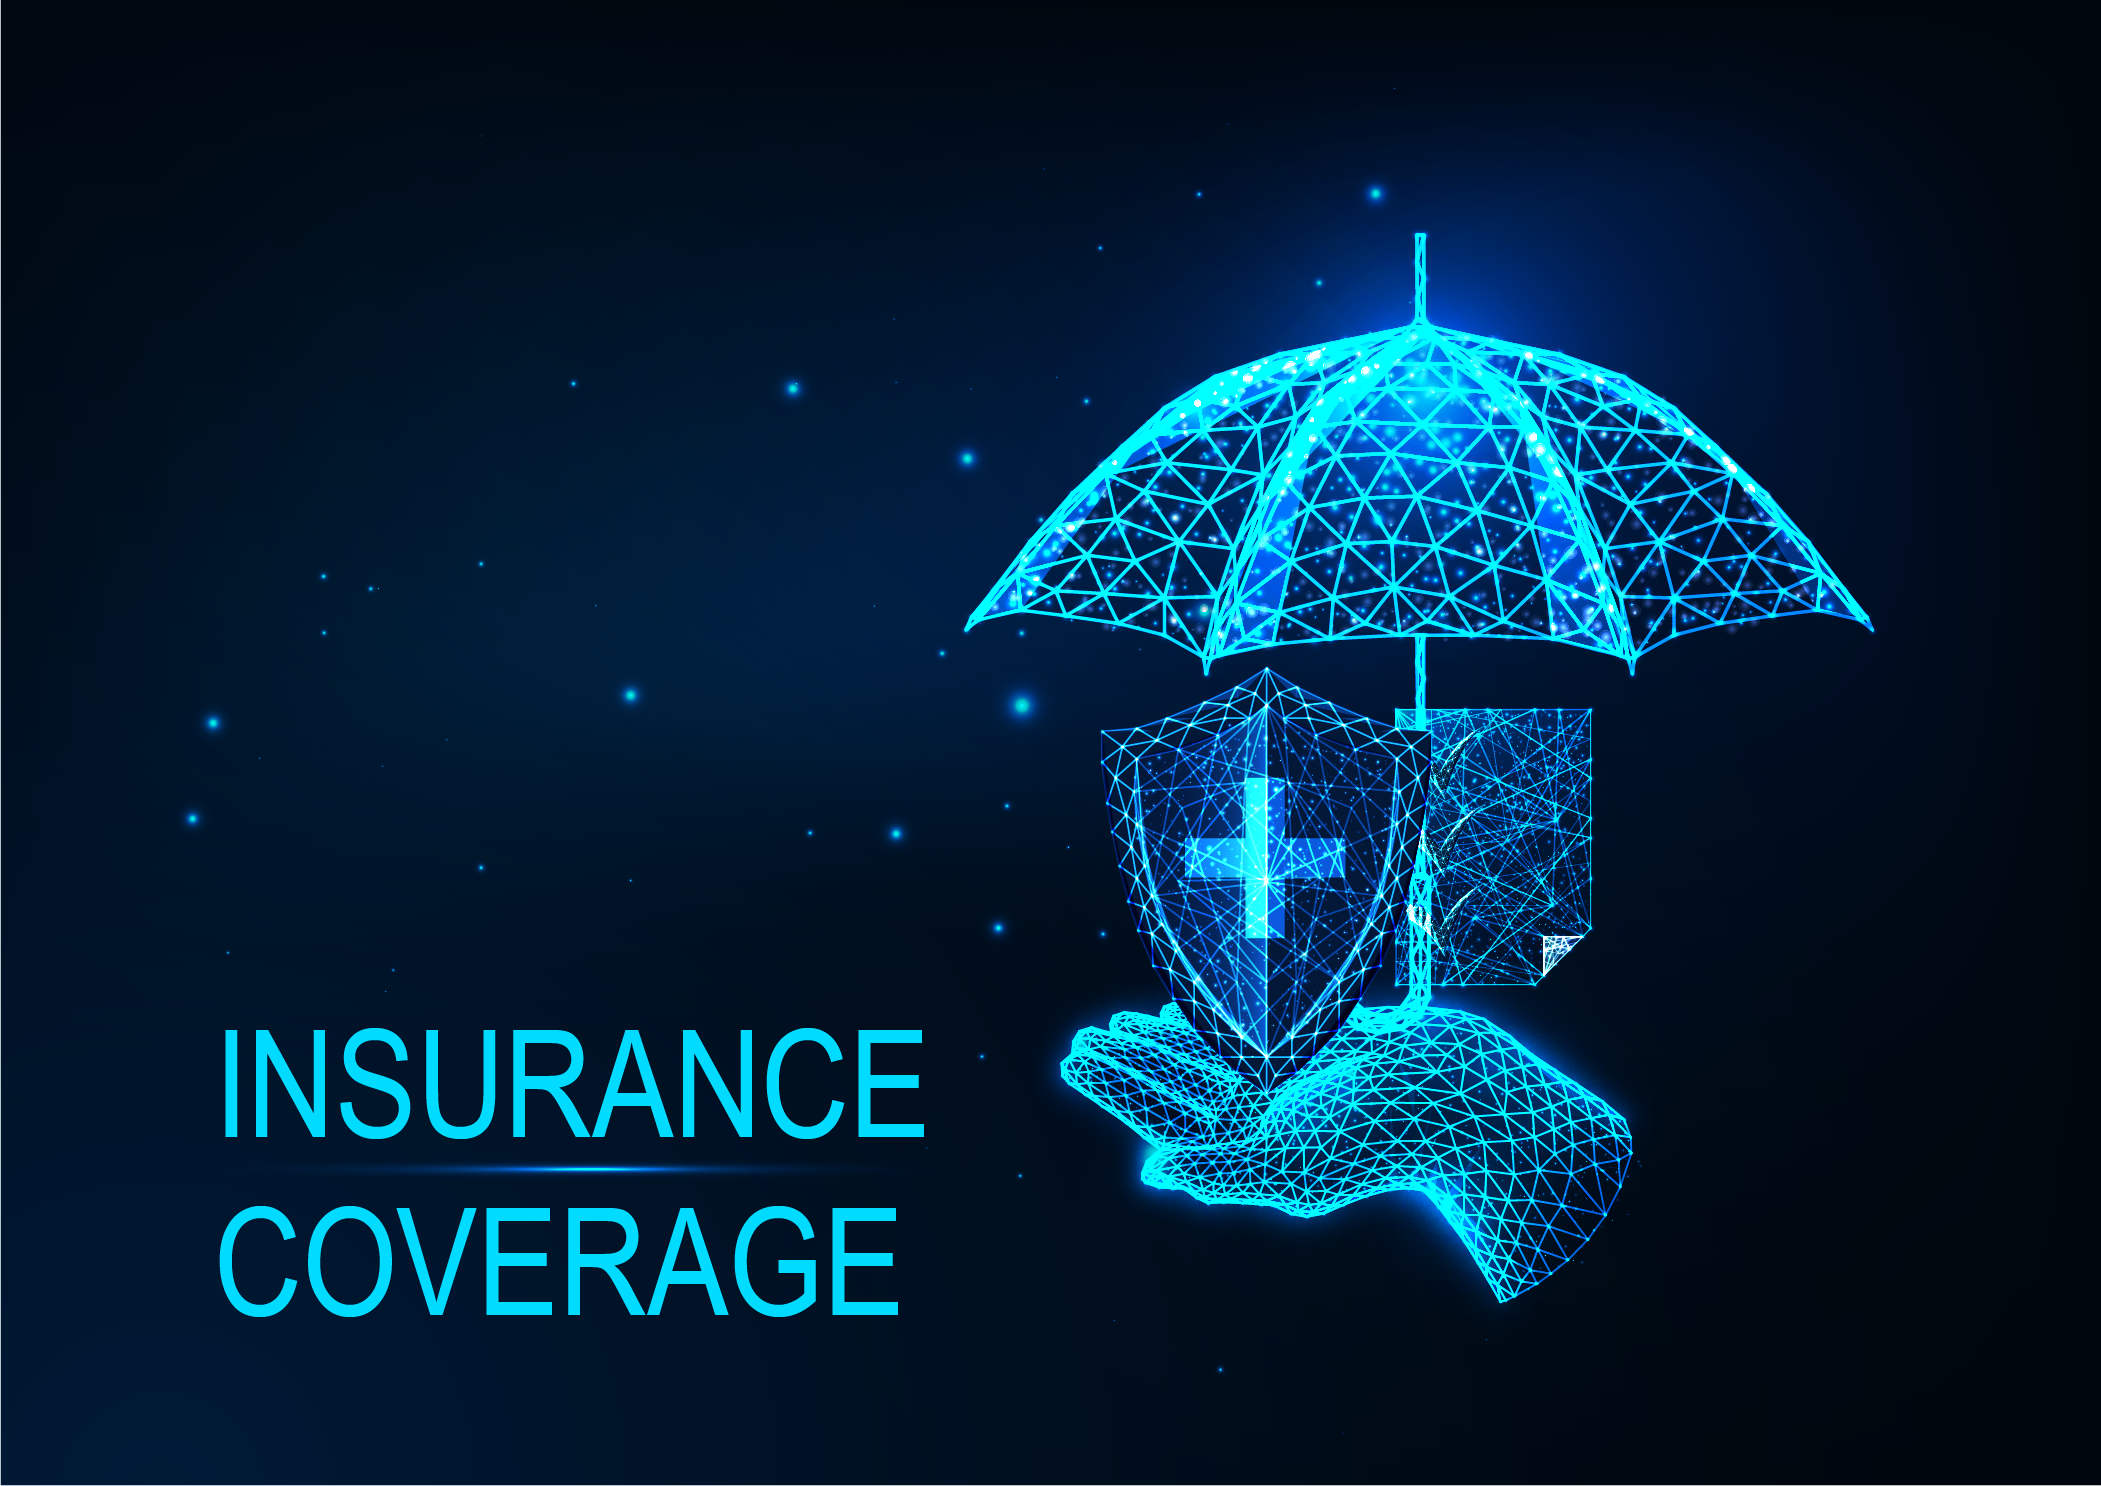 June 2022 Insurance Update: Recent Case Law Finding CGL Exclusions Apply to Biometric Information Privacy Claims